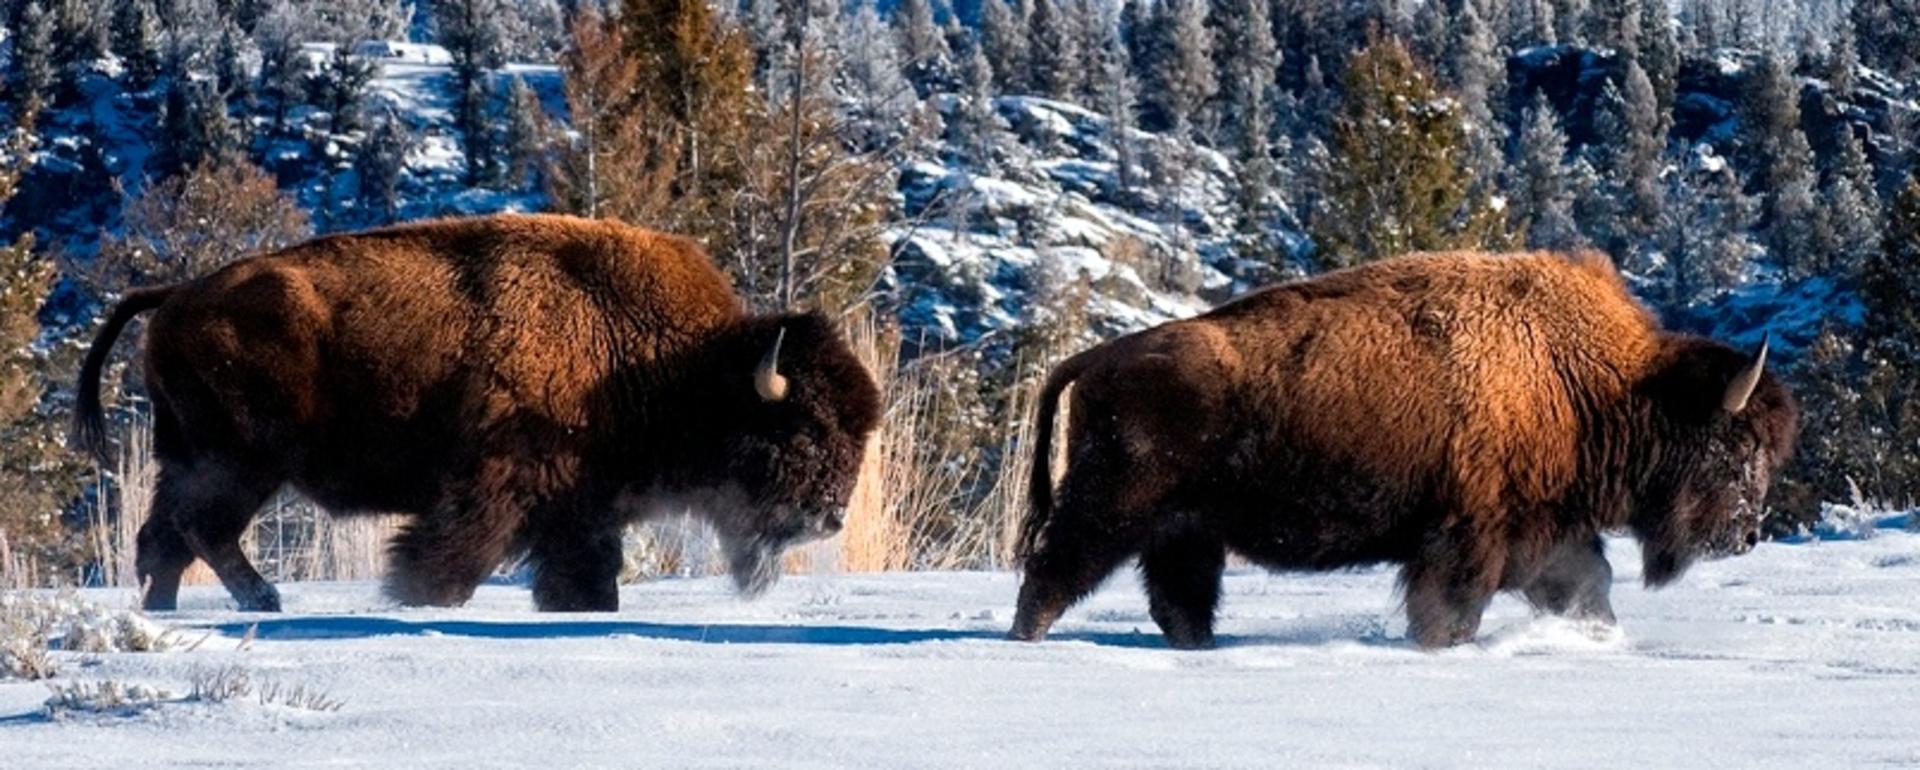 Is Montana setting back bison conservation 100 years?